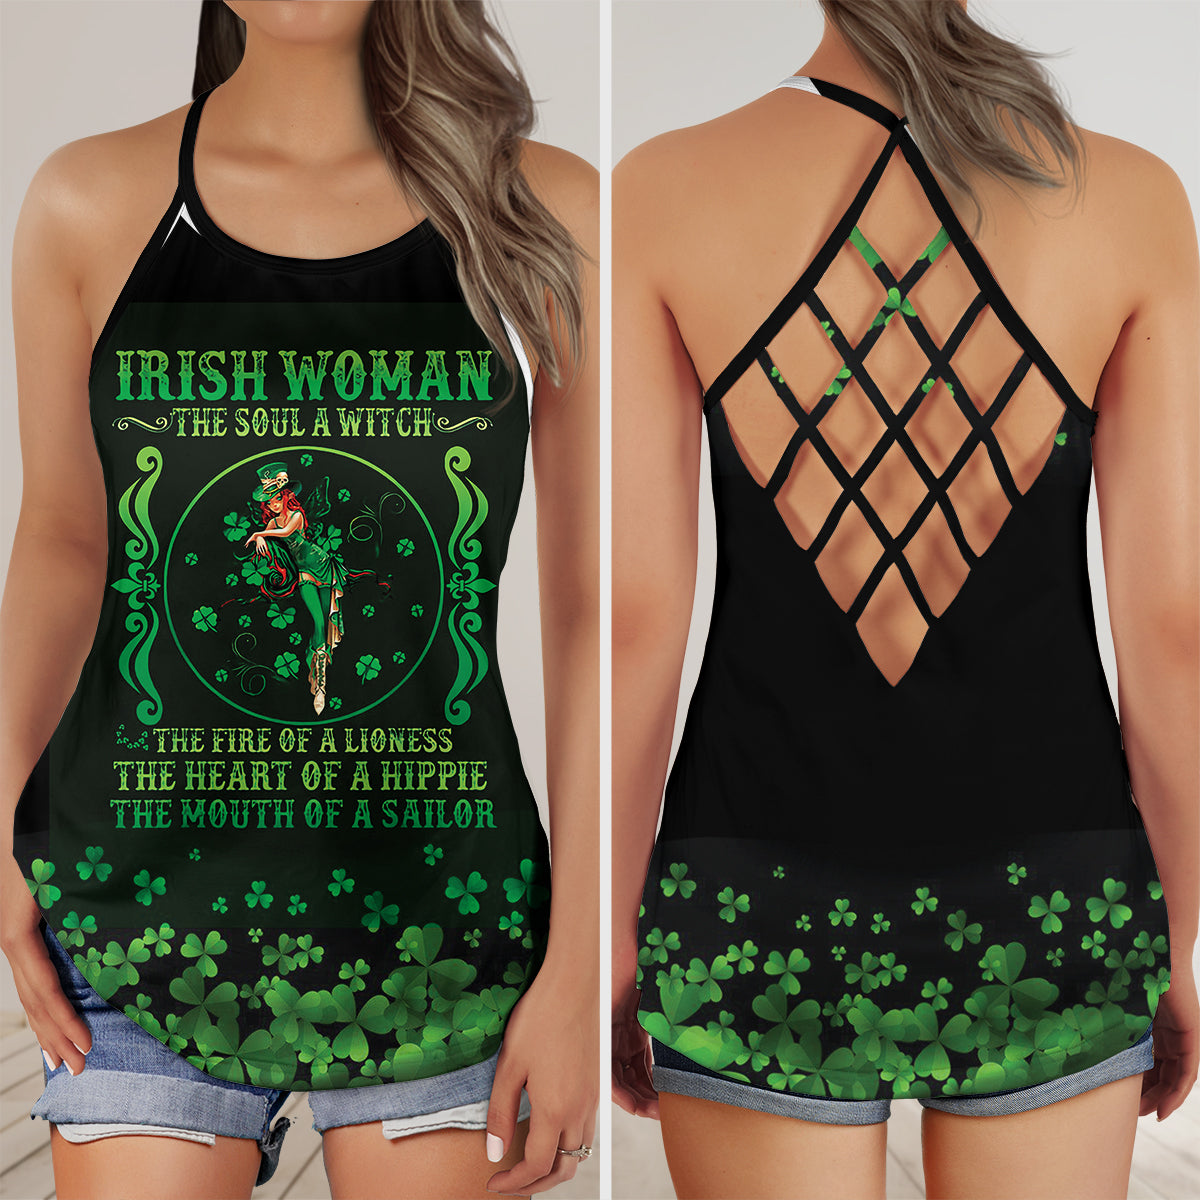 Irish Woman The Soul of A Witch St Patricks Day Criss Cross Open Back Tank Top